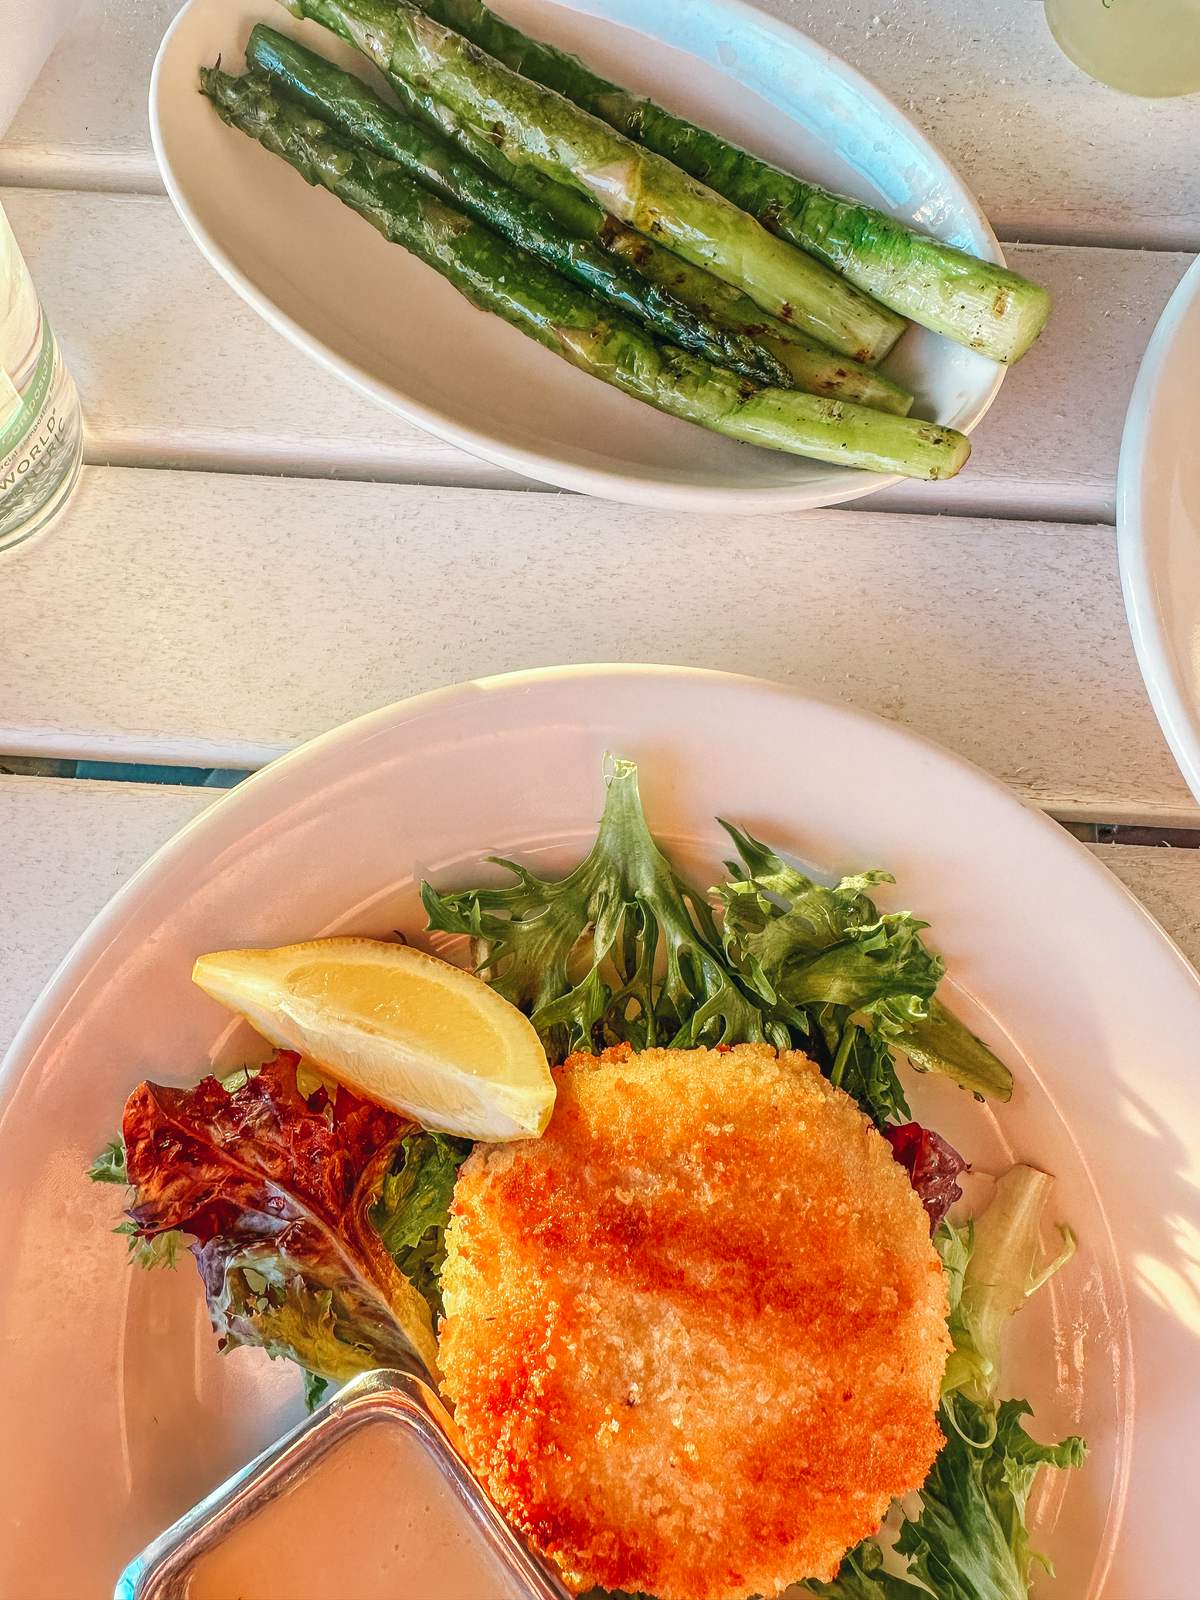 Crabcake and asparagus from Bud and Alley's in Seaside Florida